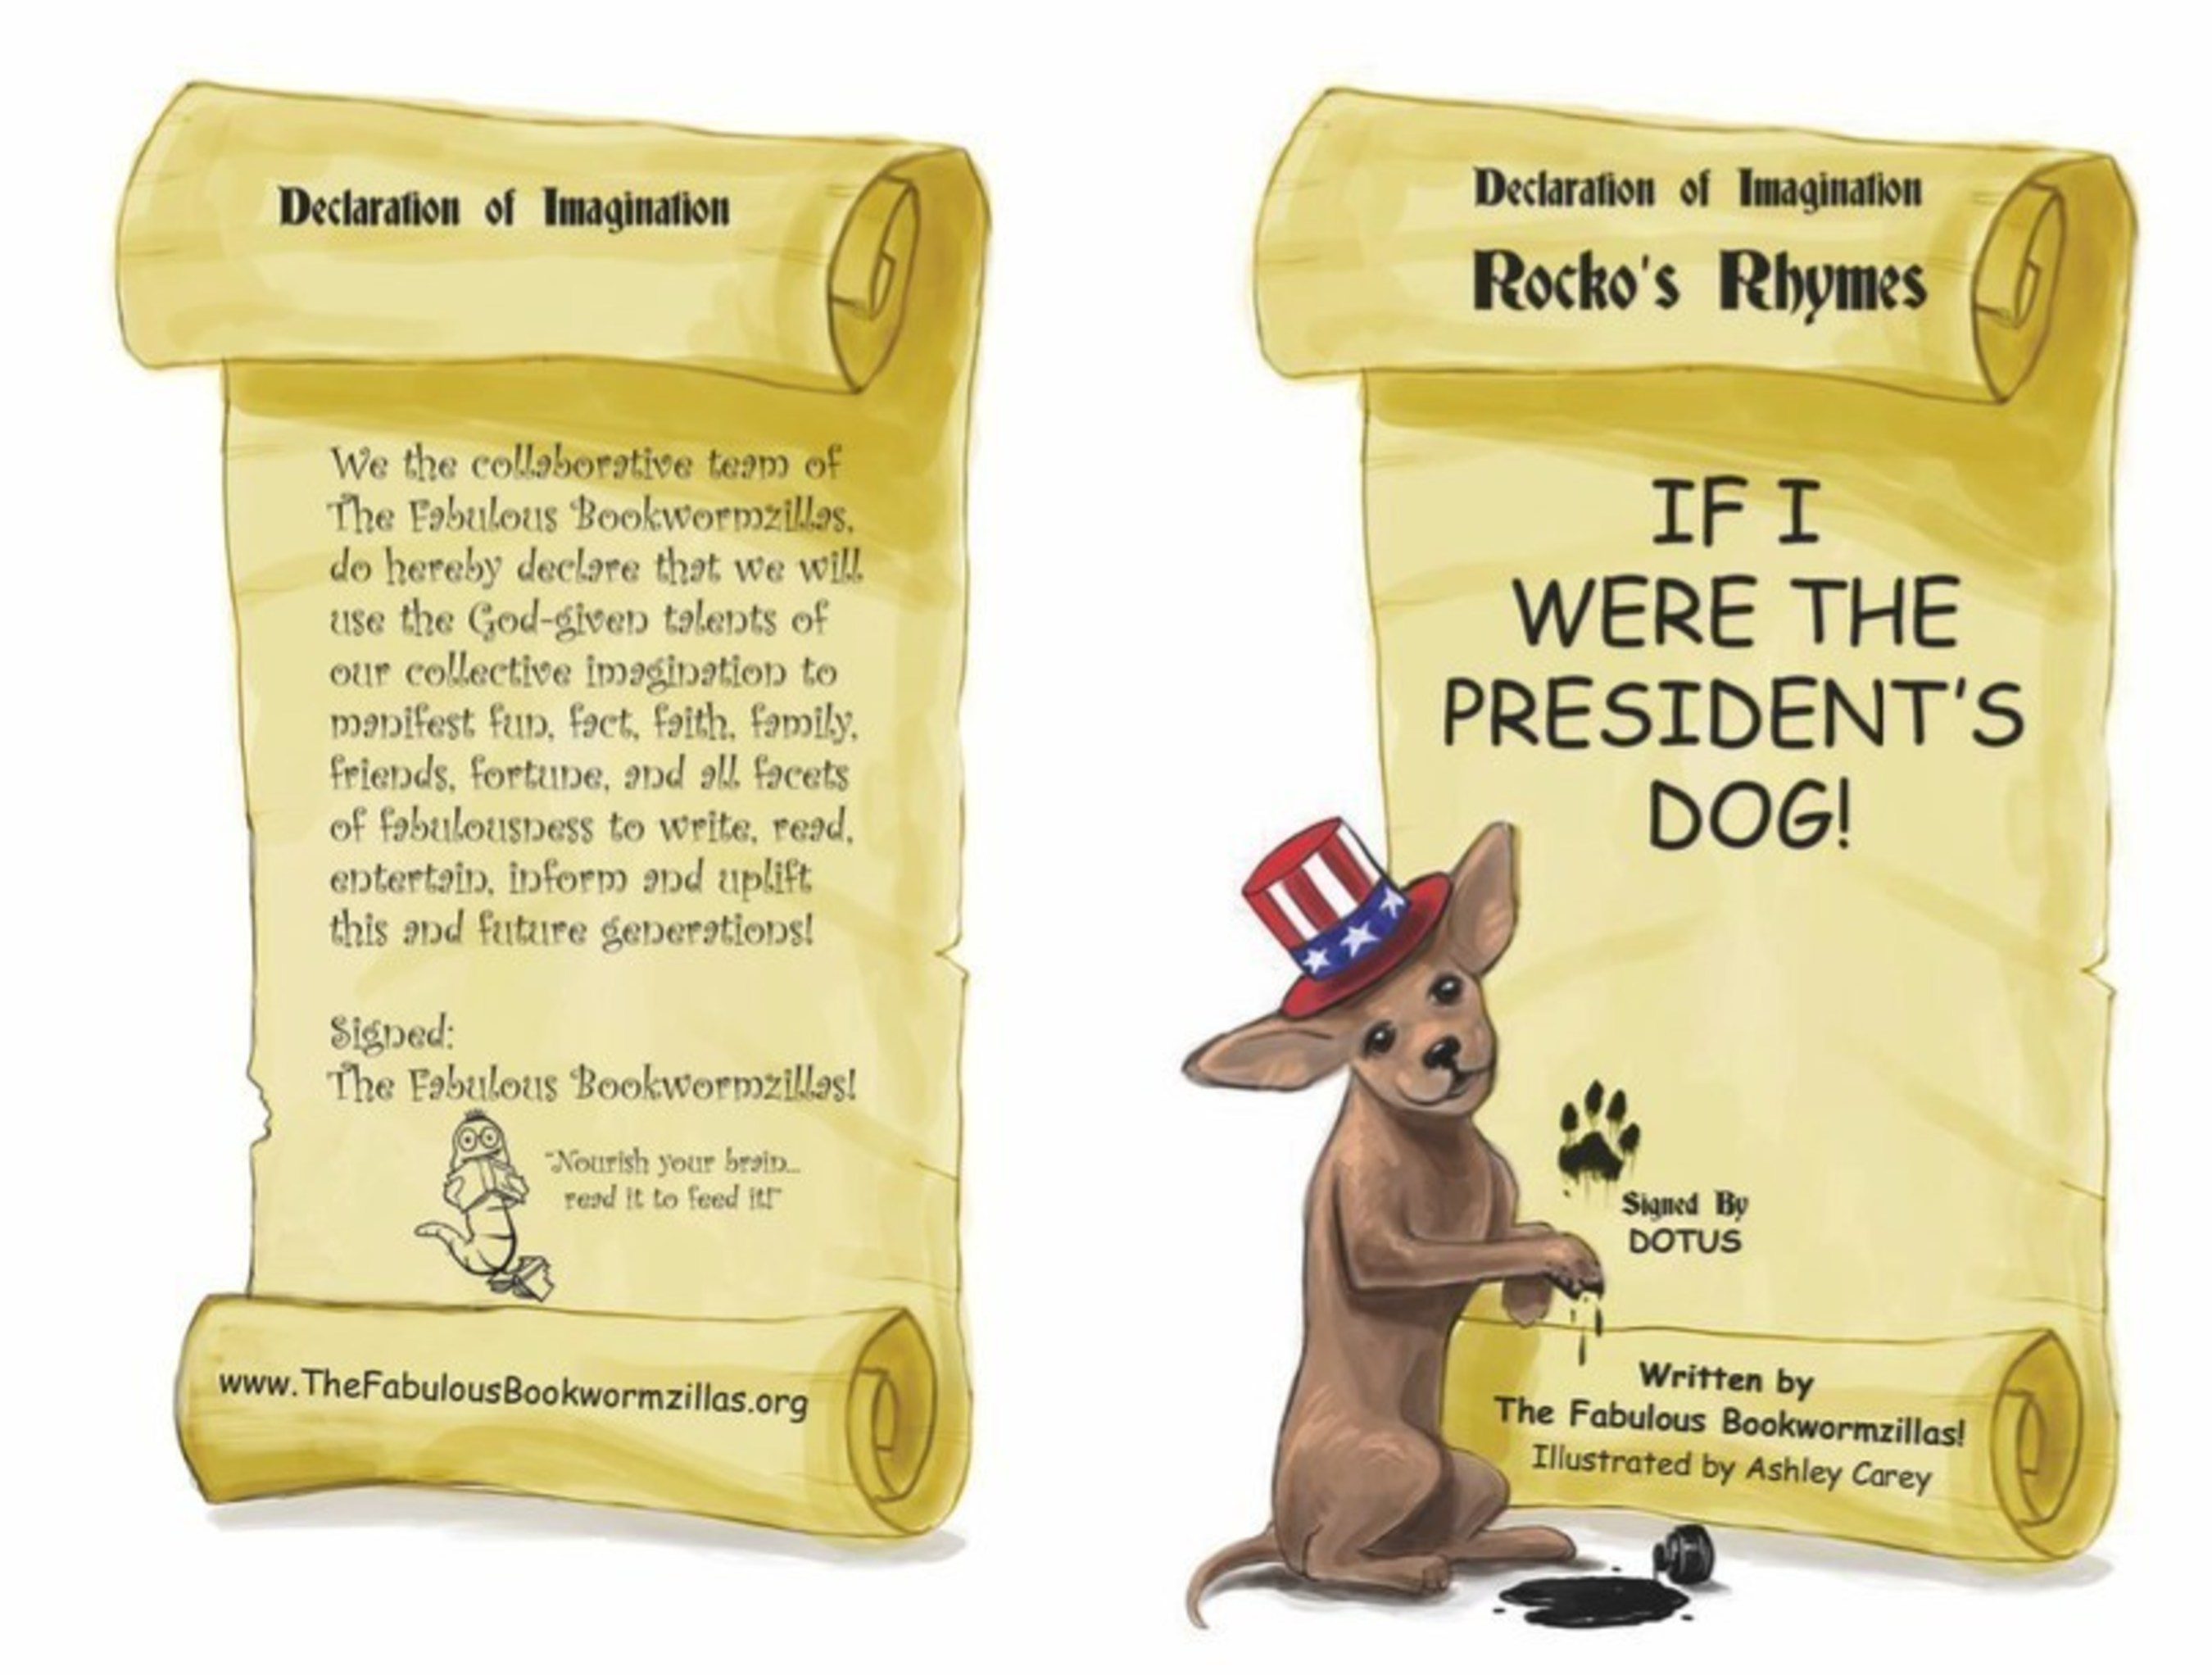 "If I Were The President's Dog!" by The Fabulous Bookwormzillas